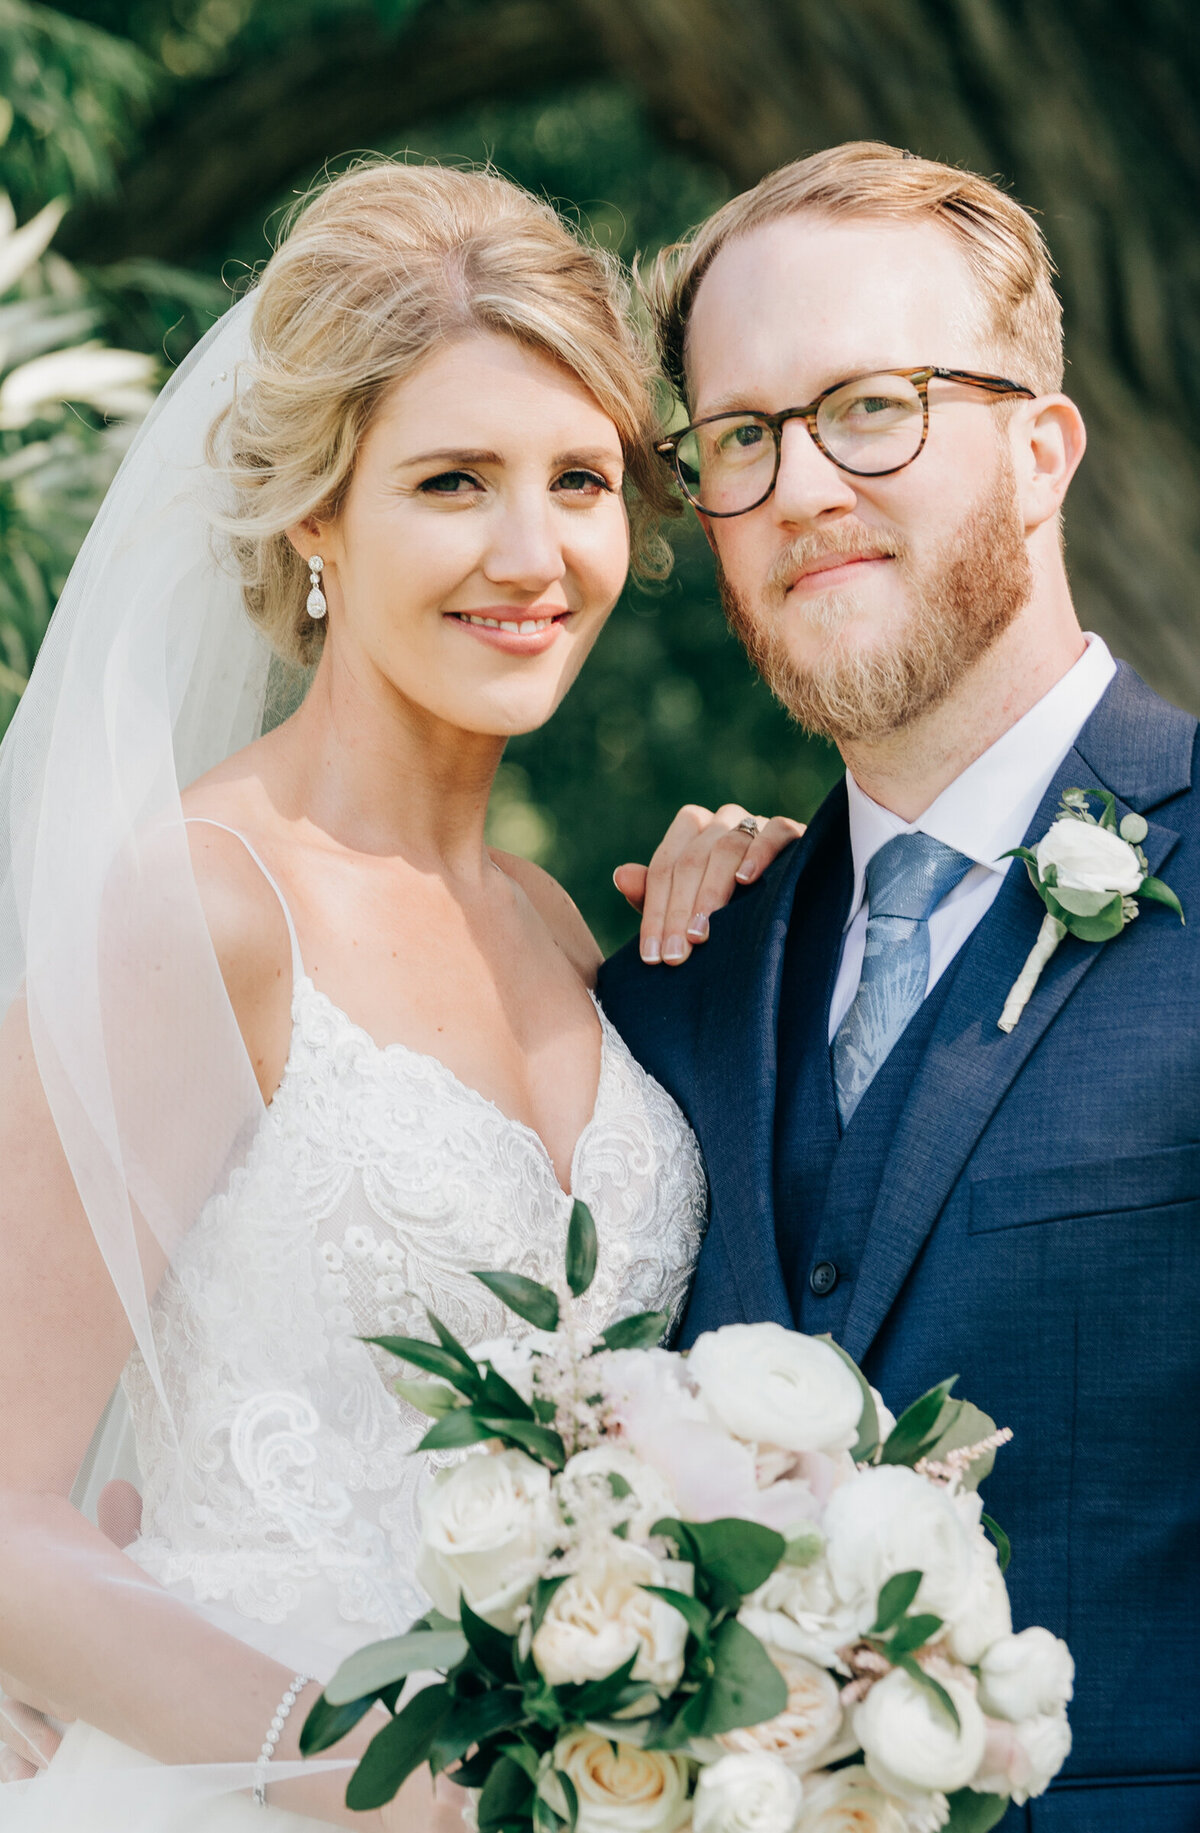 Elegant portrait of bride and groom holding bouquet of white roses and eucalyptus